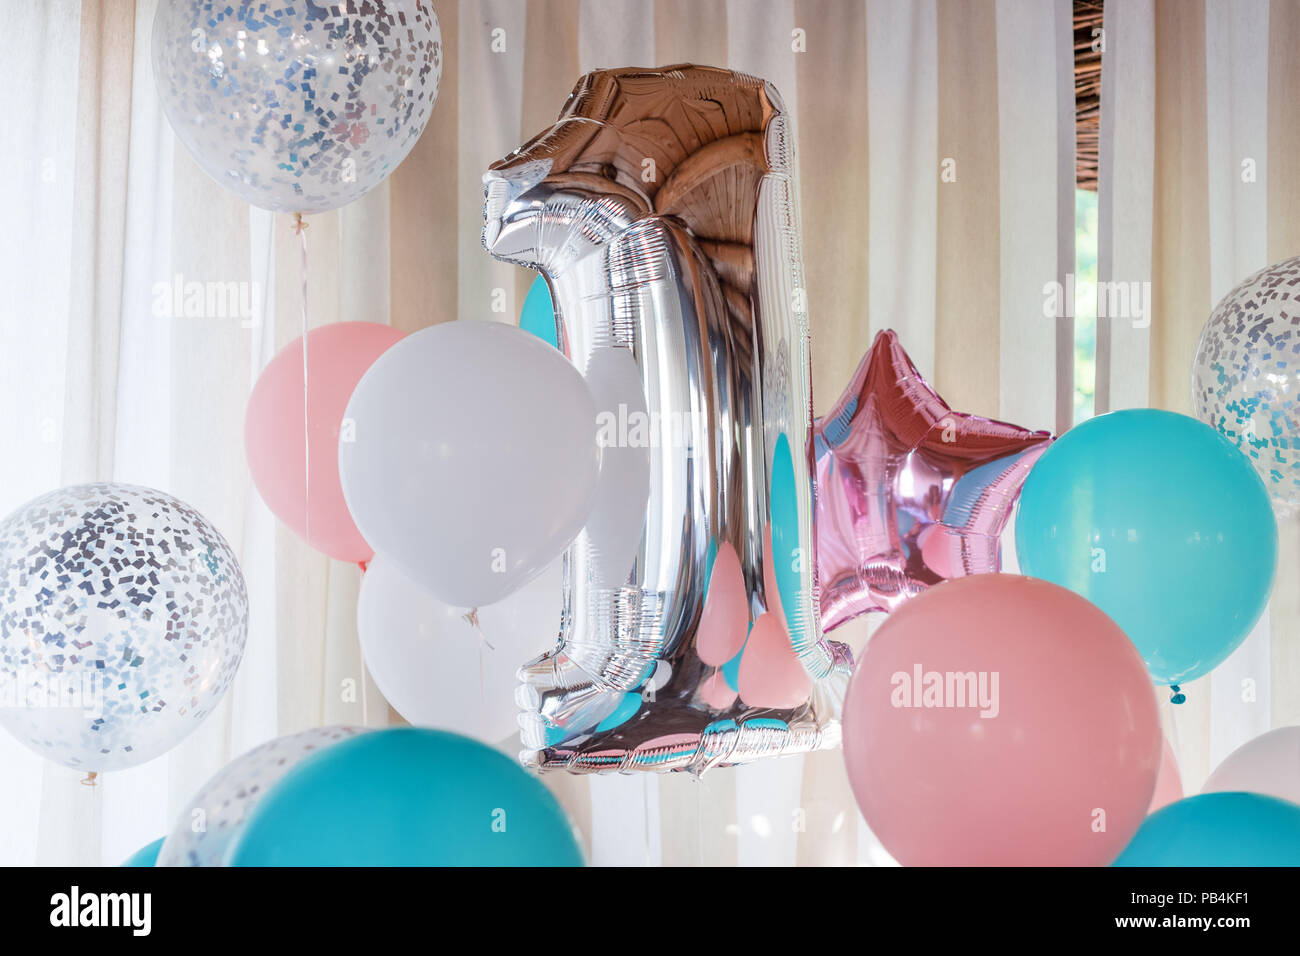 Pink, silver and blue inflatable balloons on ribbons - number 1. Decorations for birthday party. Metallic design balloon Stock Photo